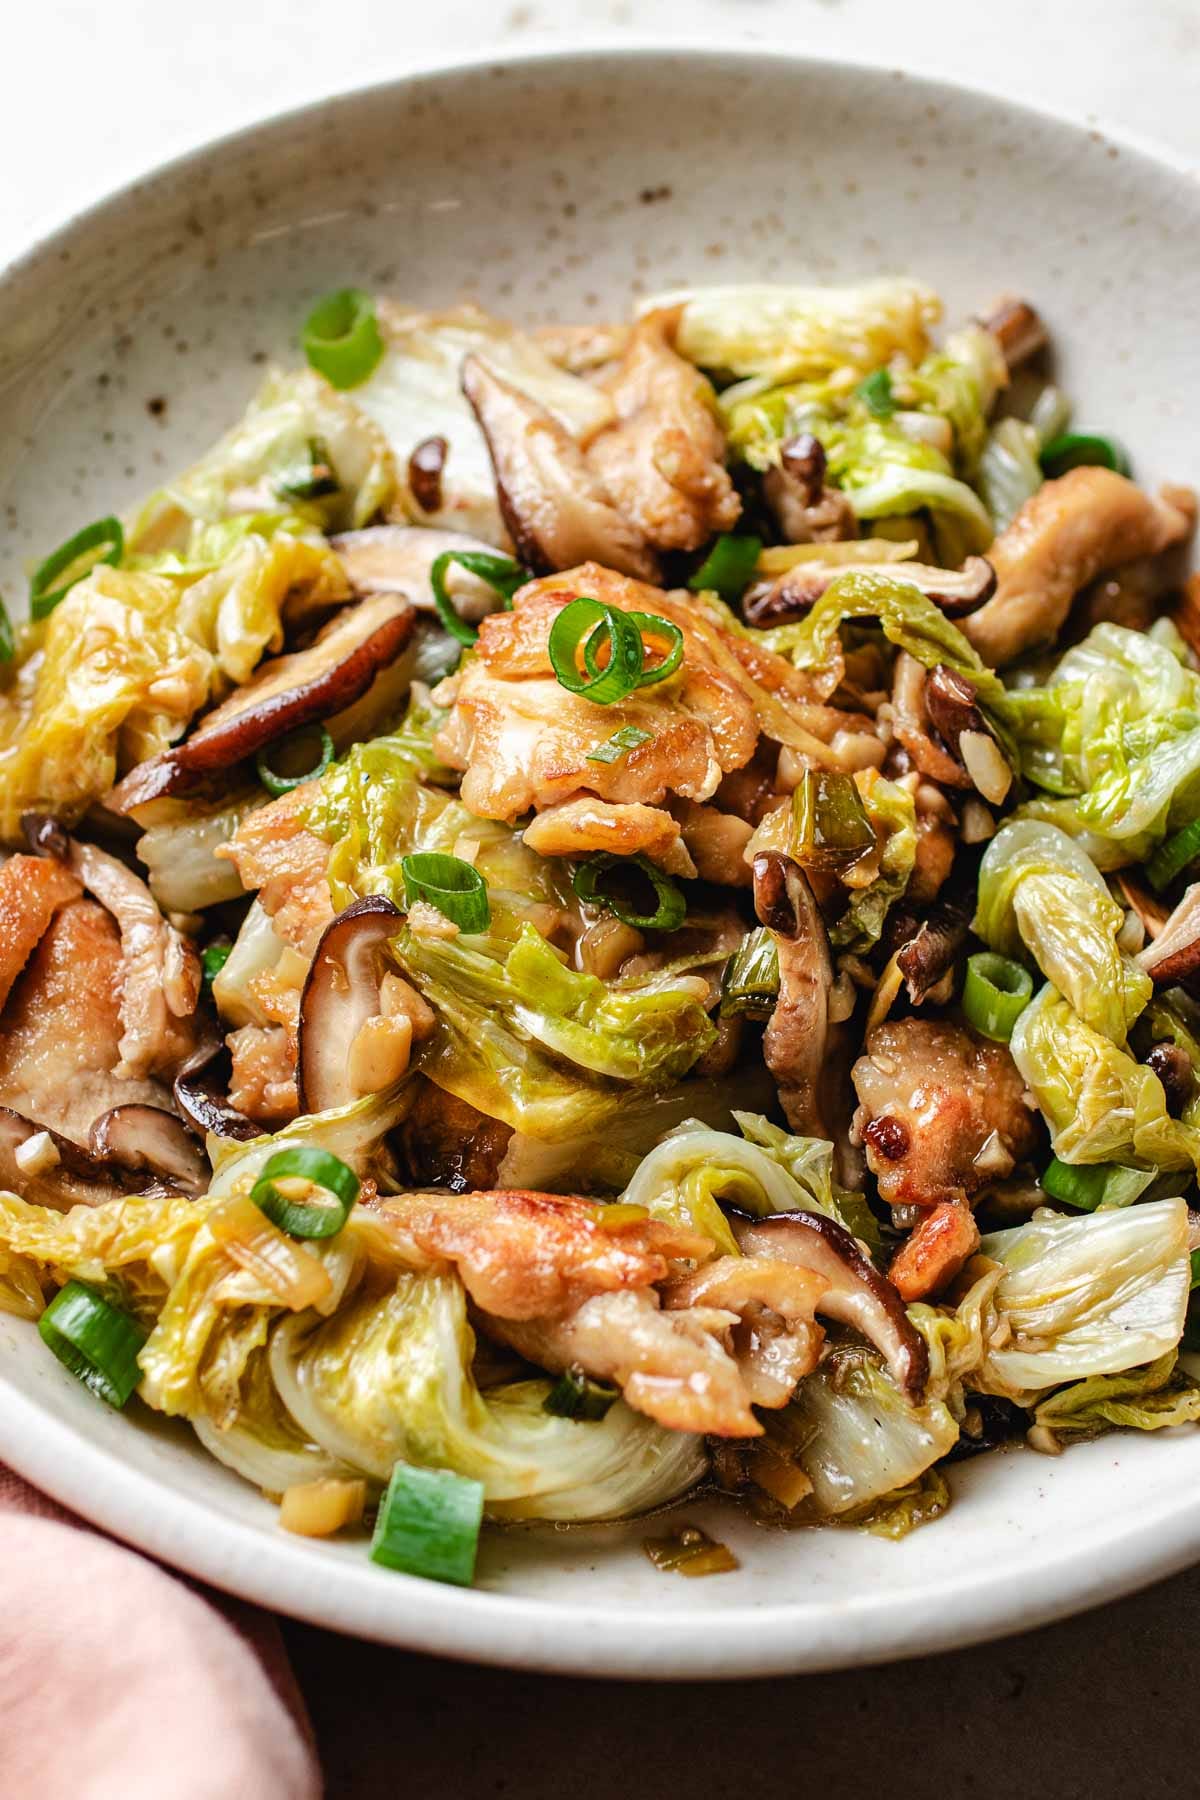 A side close shot image shows tender napa cabbage stir fry with chicken breasts and shiitake